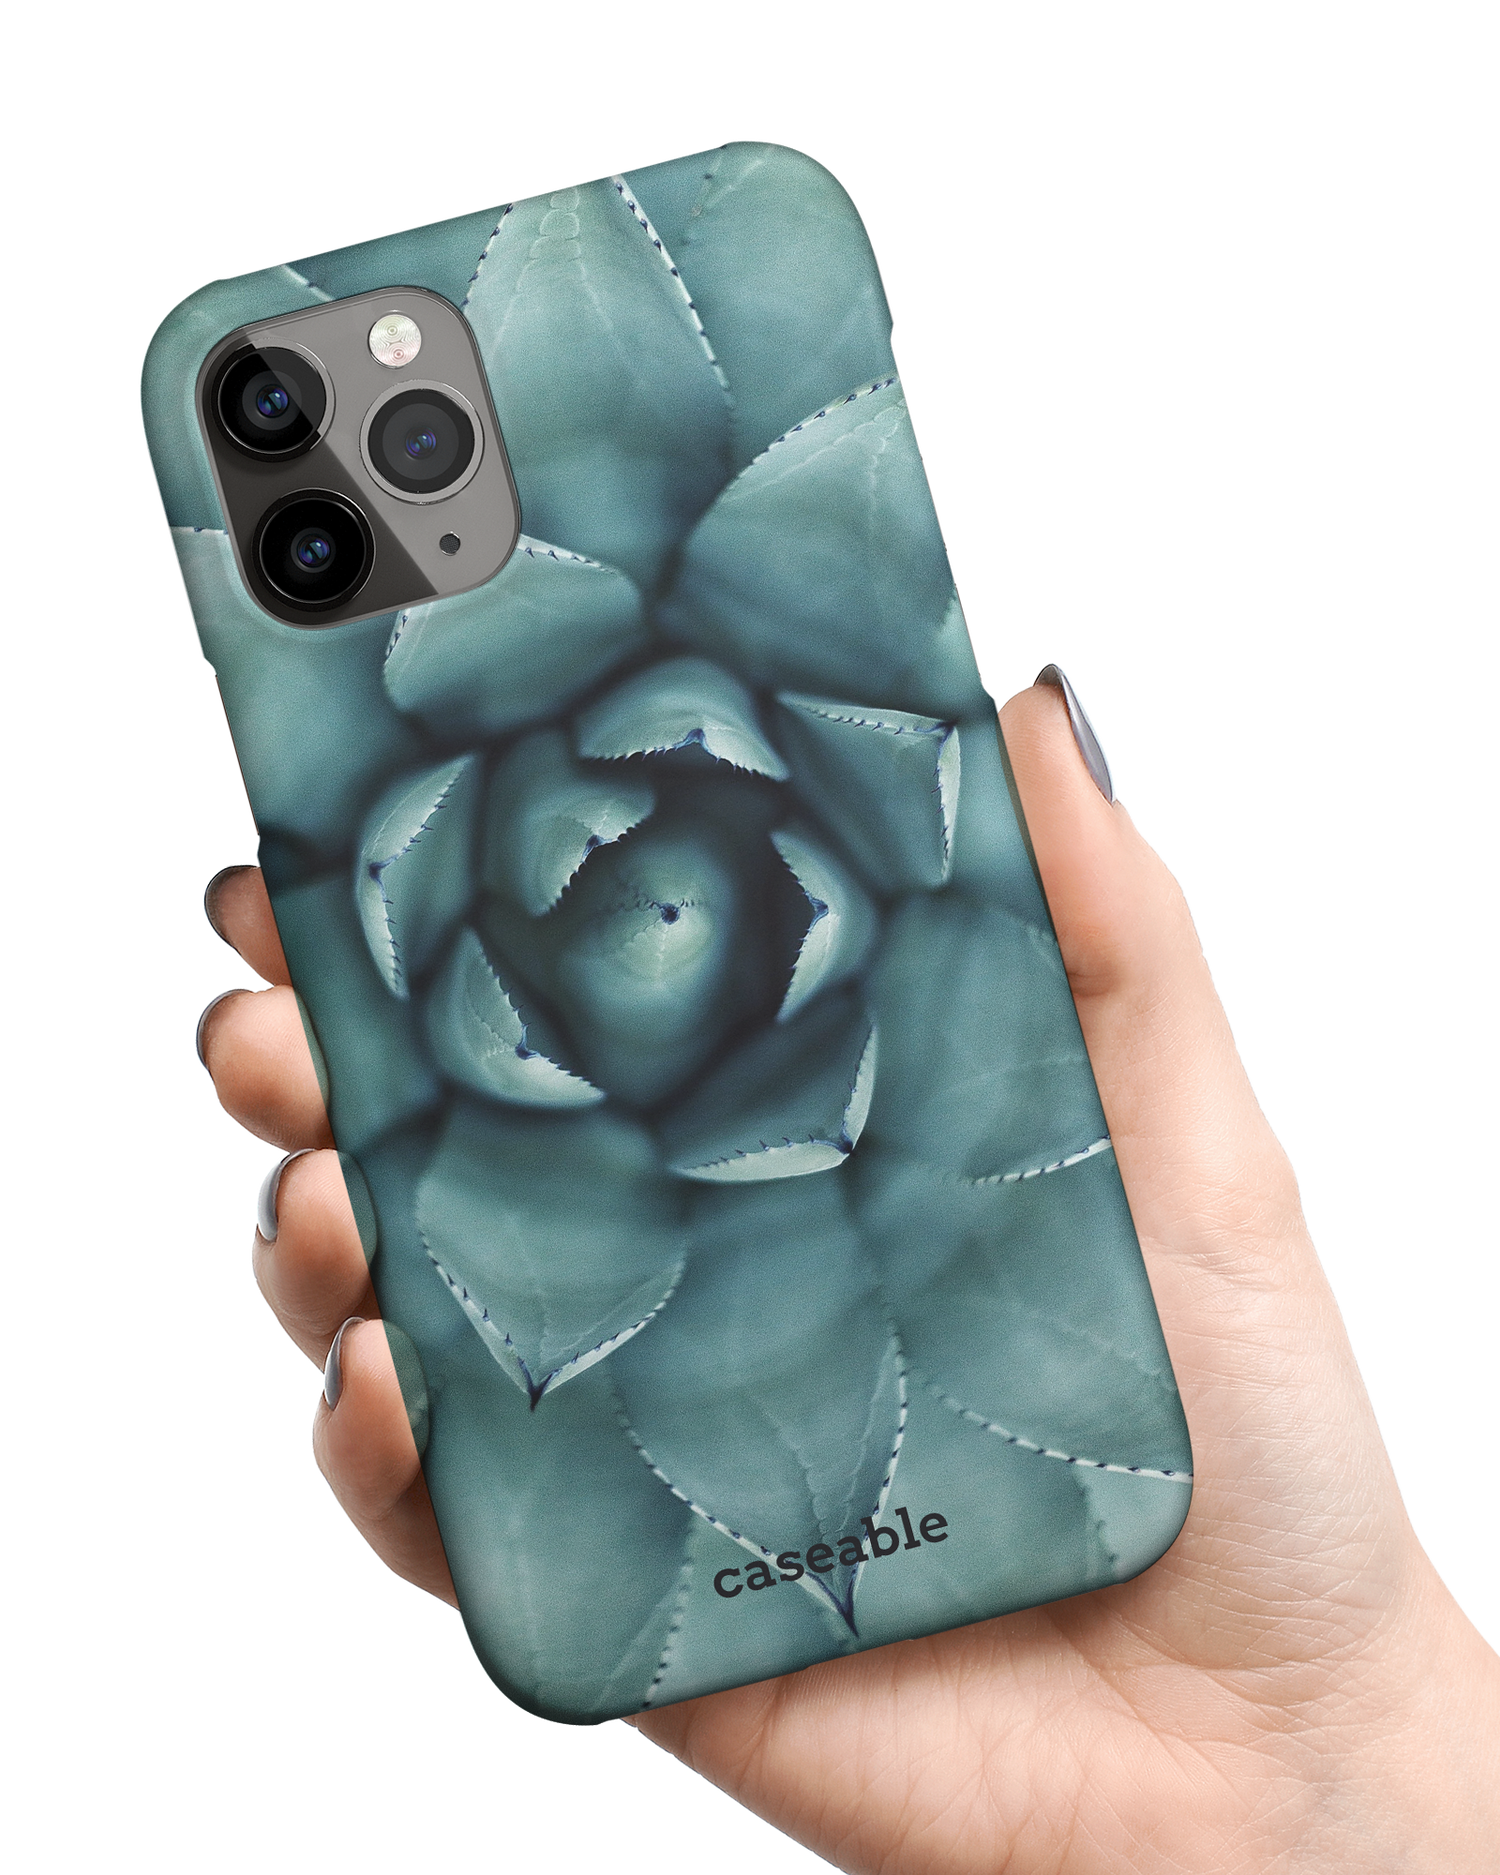 Beautiful Succulent Hard Shell Phone Case Apple iPhone 11 Pro Max held in hand